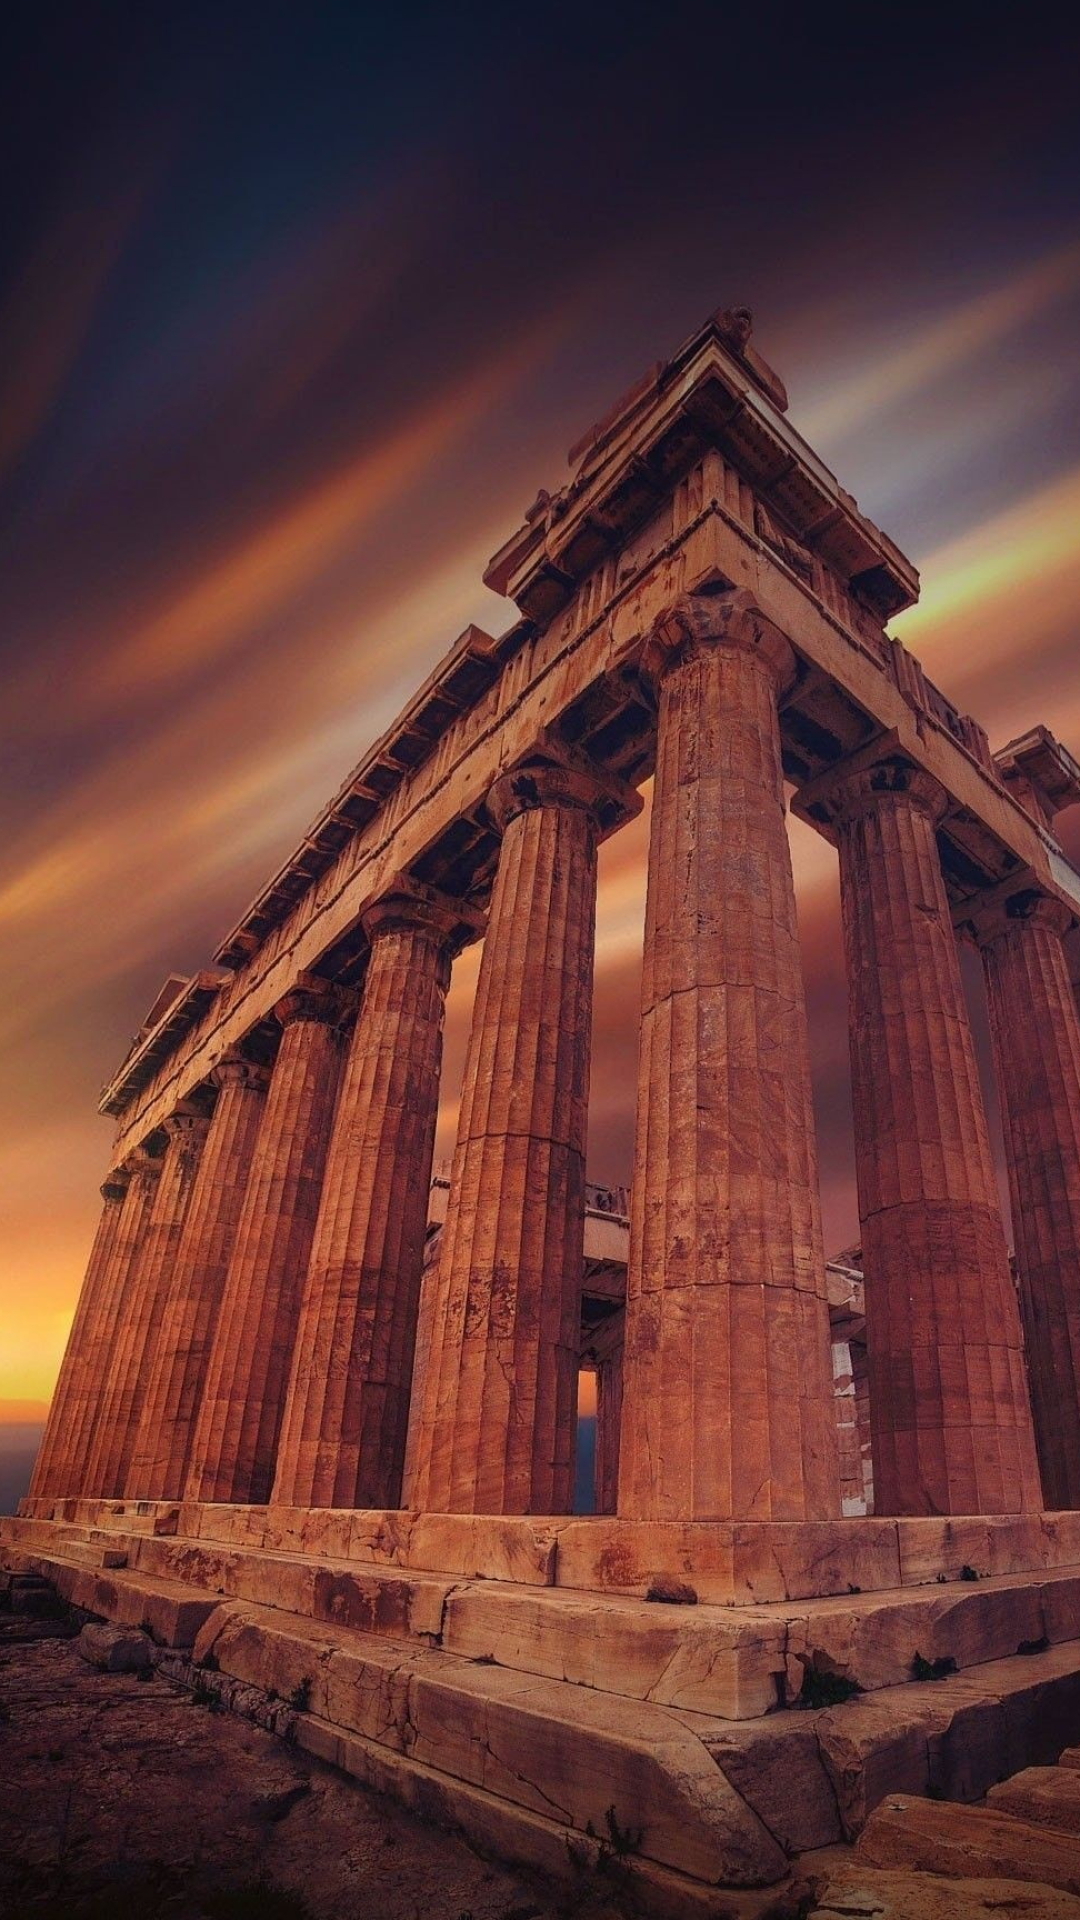 Parthenon wallpapers, Stunning visuals, Iconic structure, Historical significance, 1080x1920 Full HD Handy